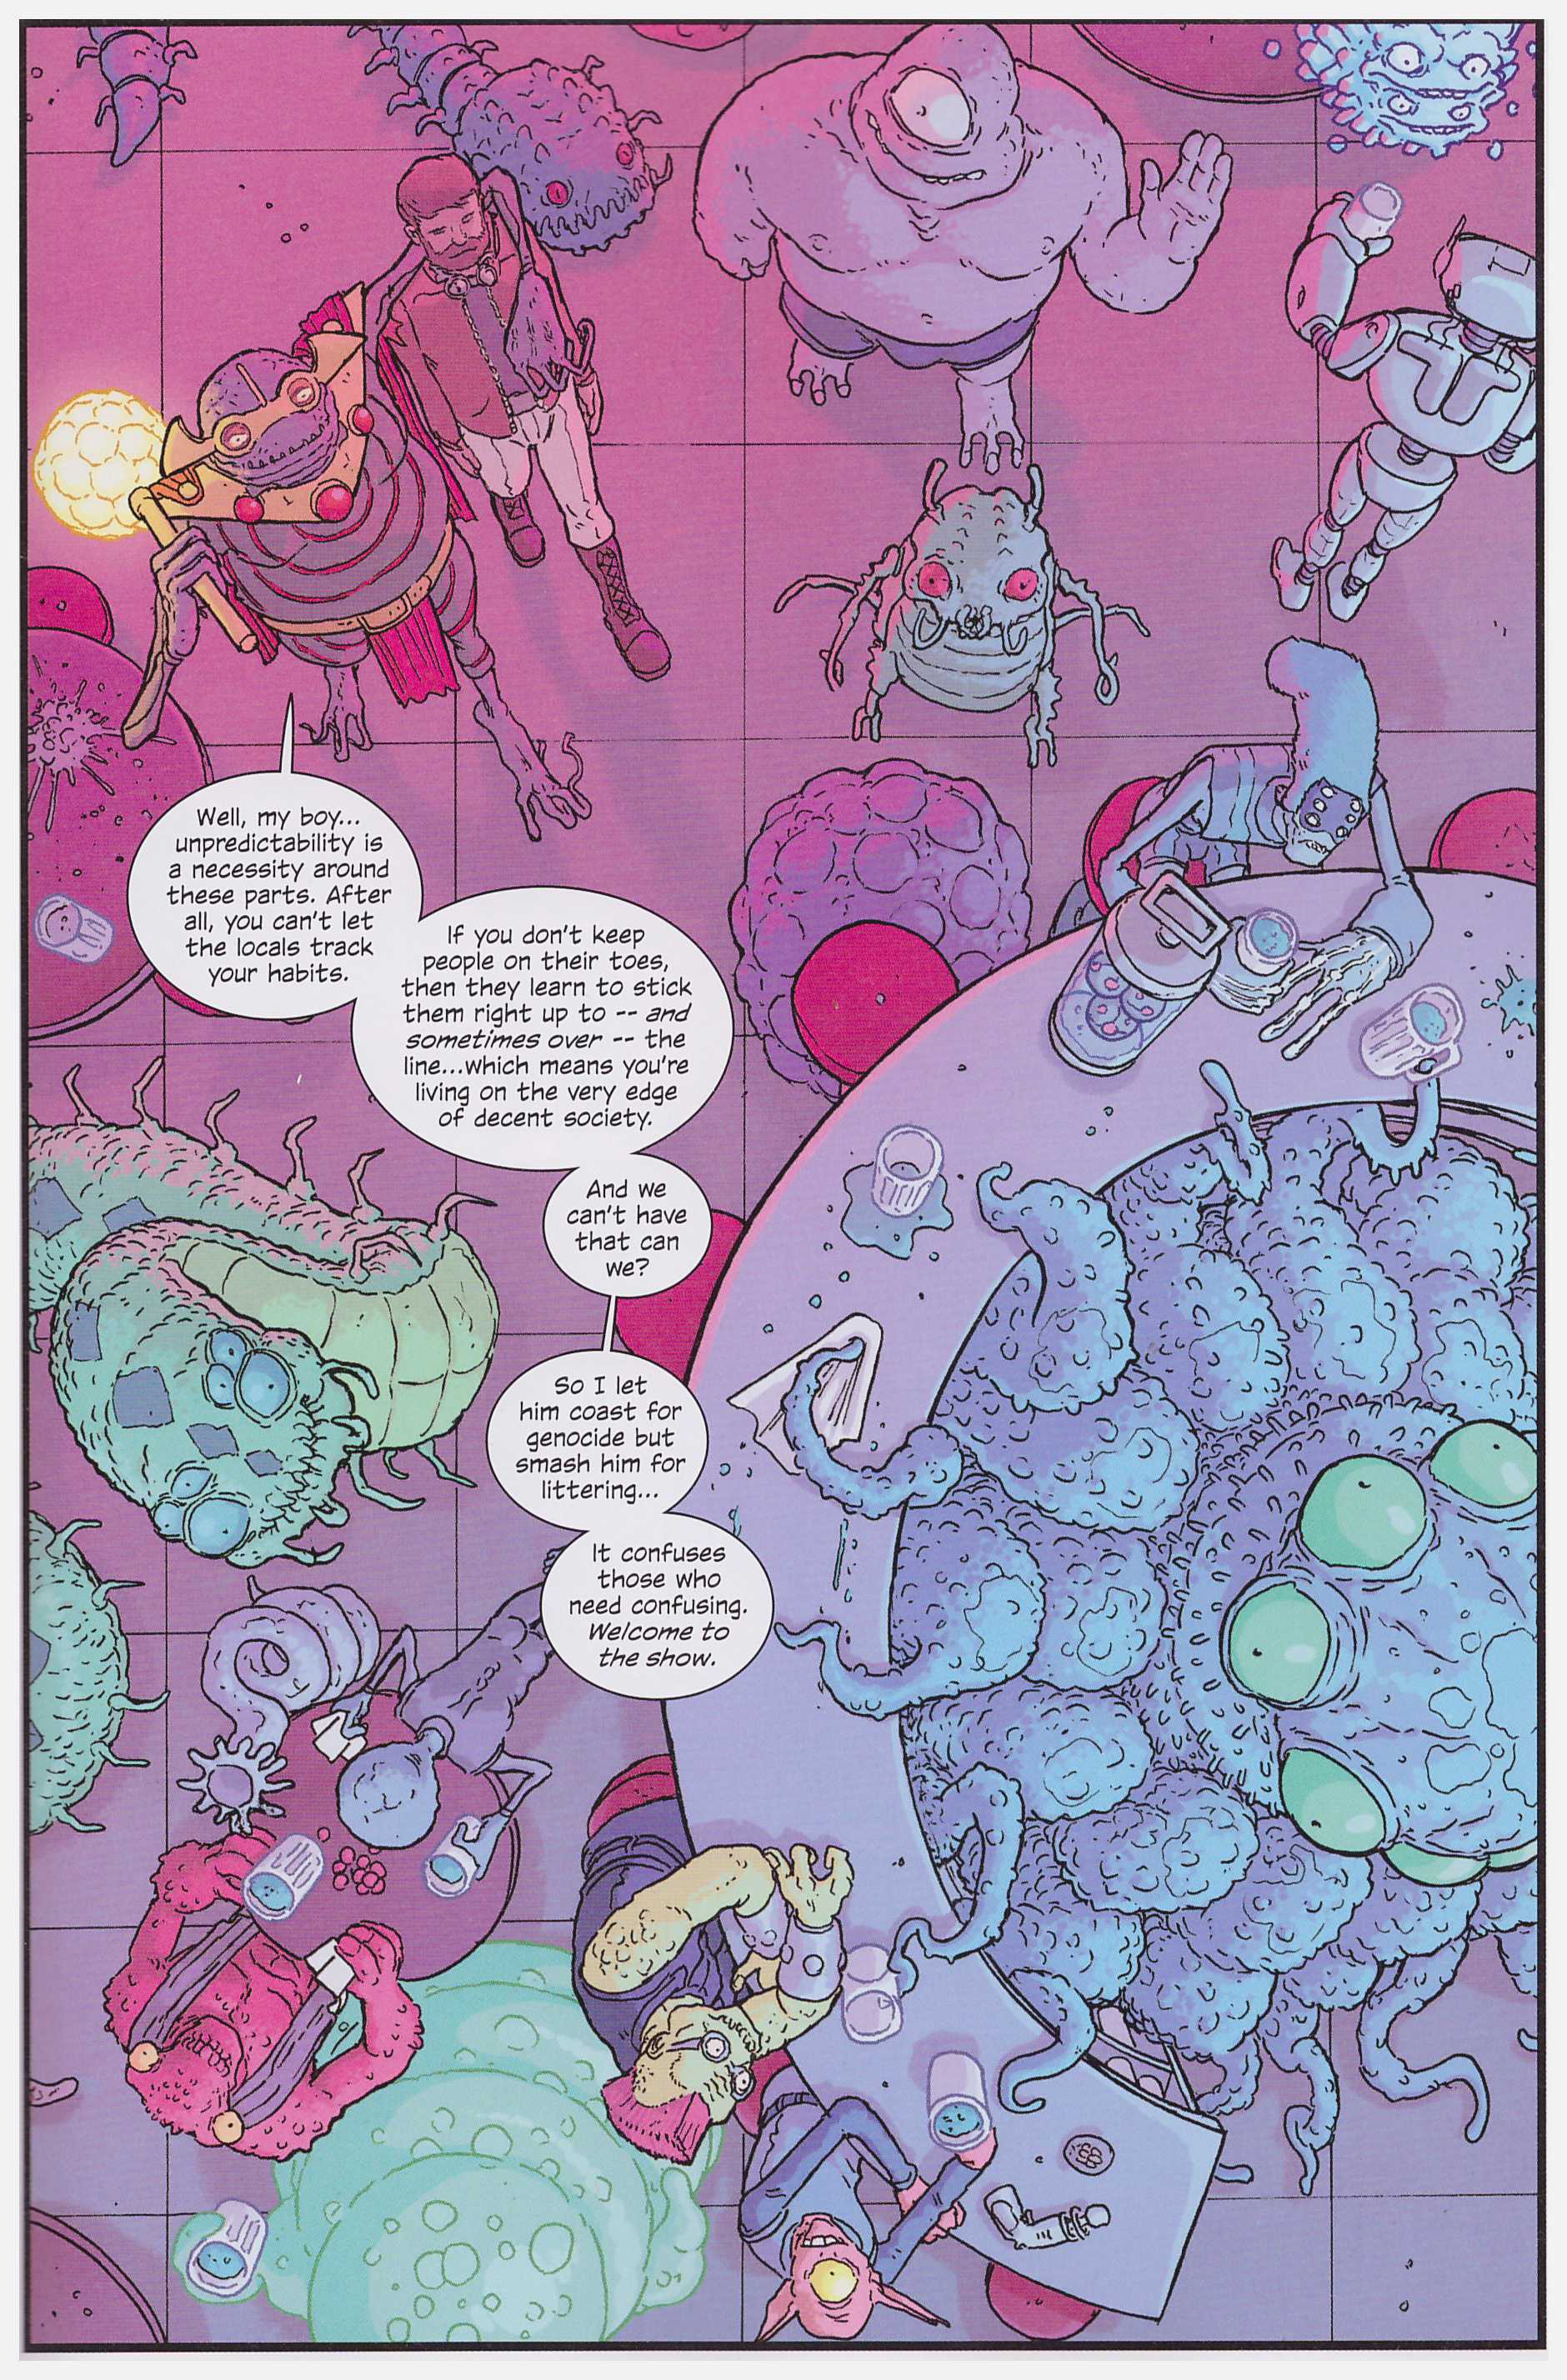 Manhattan Projects 6 review